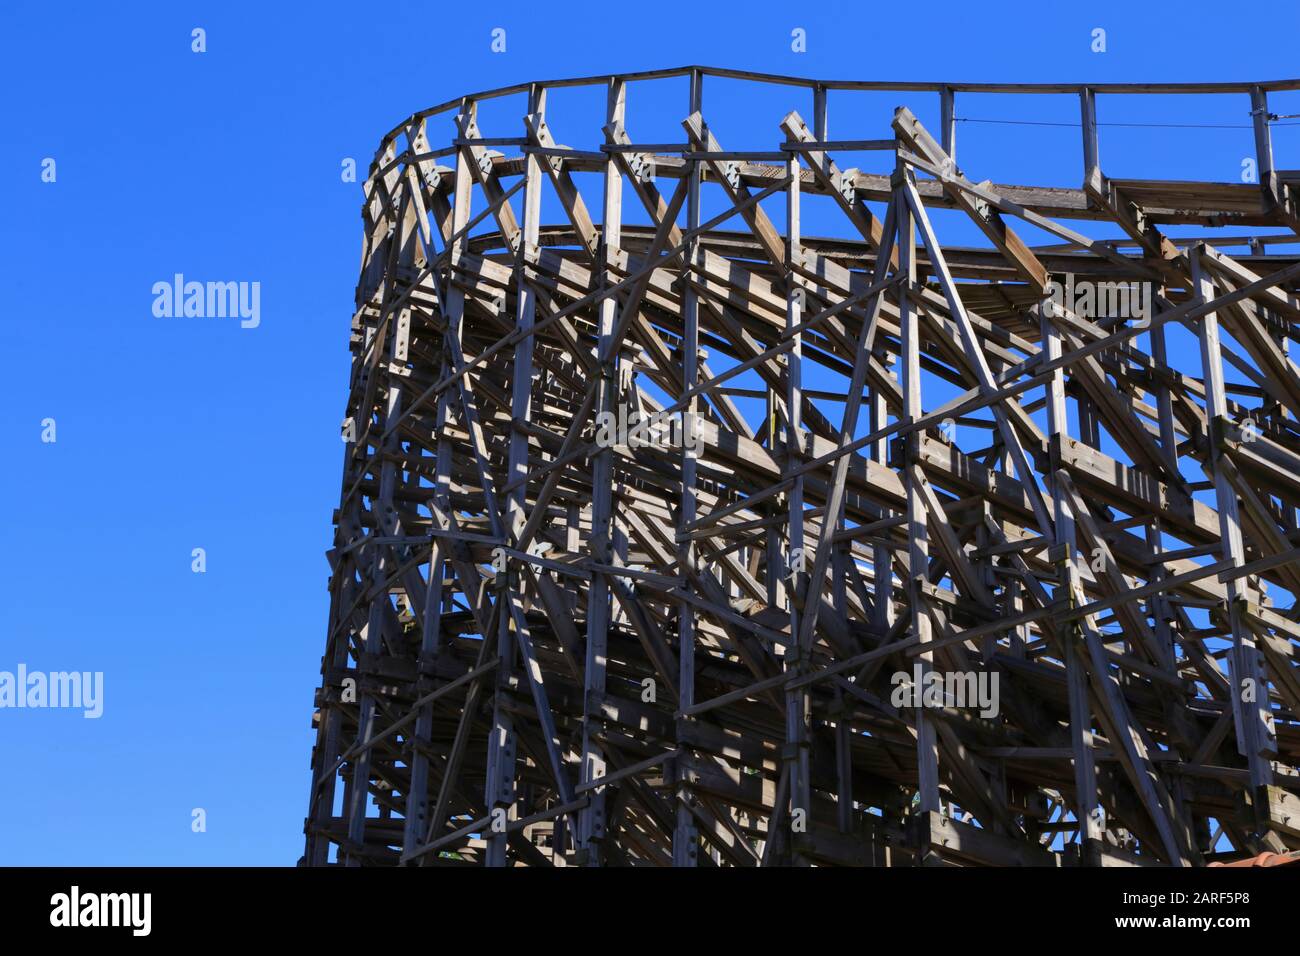 Close up of the wooden roller coaster tracks of Balder amusement ride (constructed by Intamin) in Liseberg theme park in Gothenburg city, Sweden. Stock Photo